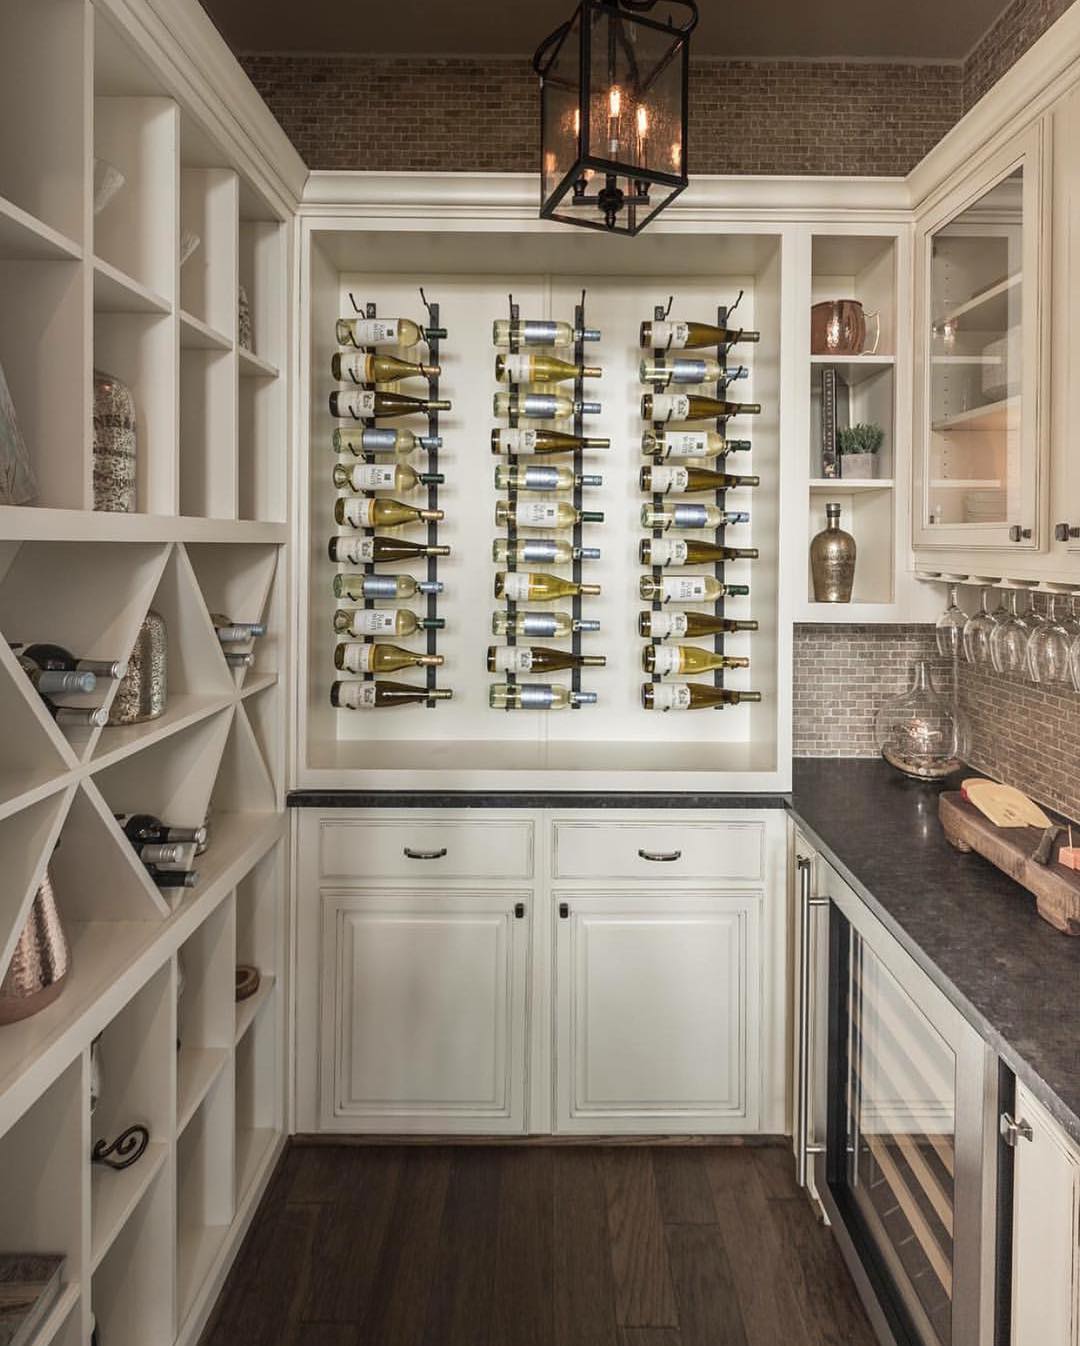 Wine Bottles Stored on the Wall of the Kitchen. Photo by Instagram user @creativehousedesigninterior